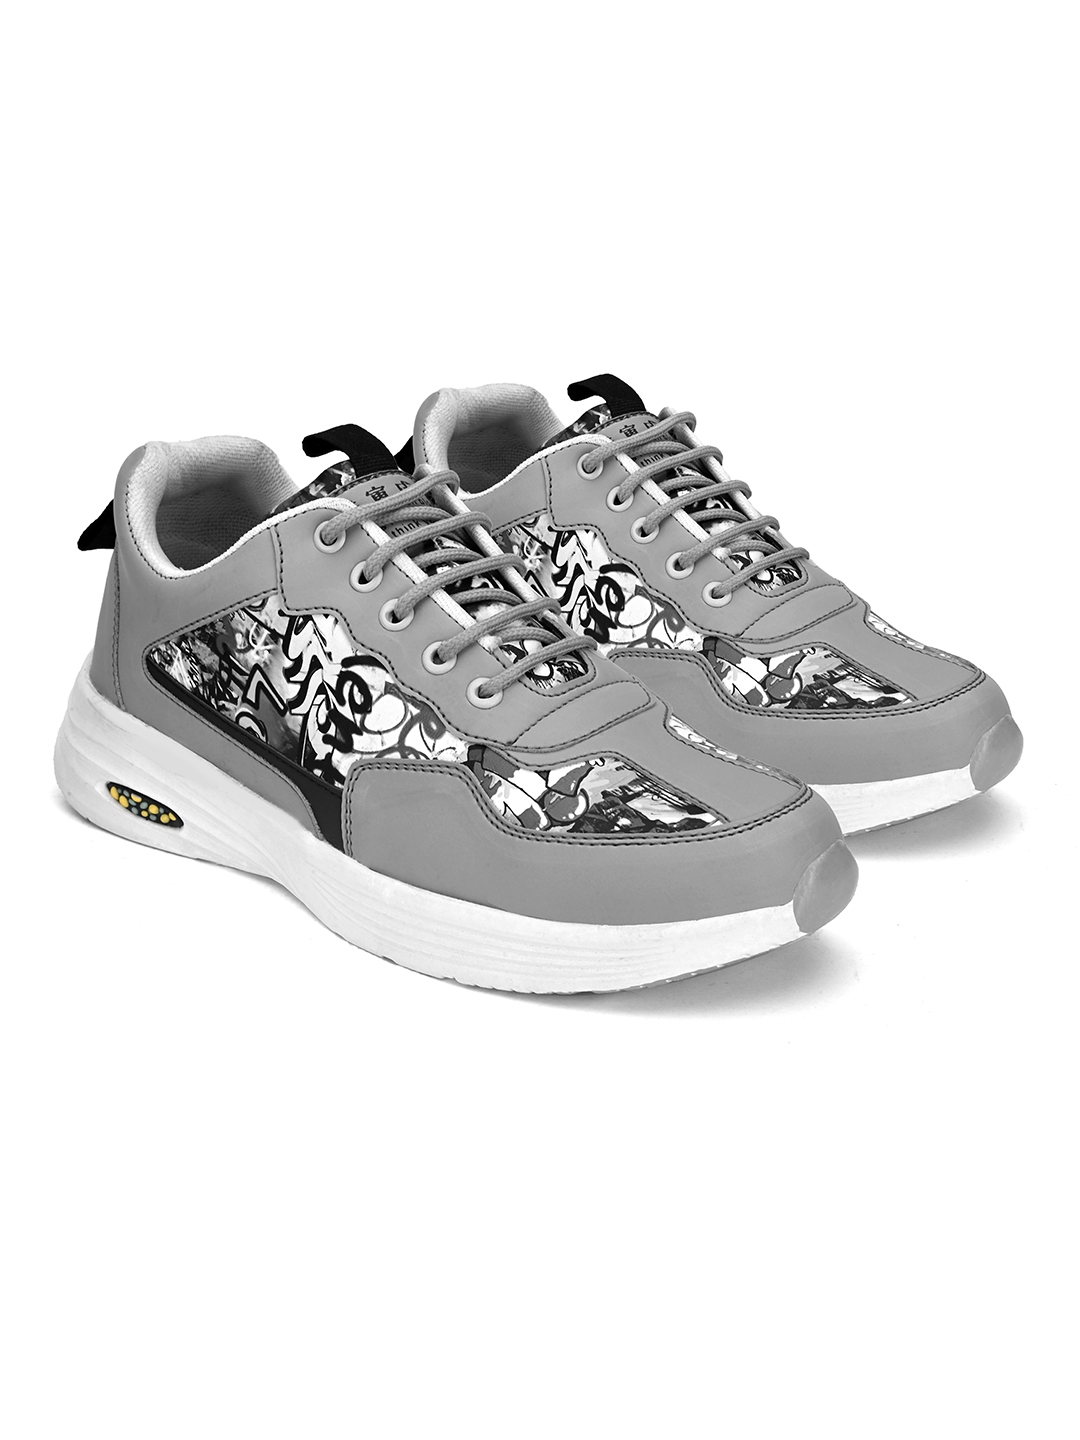 RAY J | RAY J Grey Lace-Up Sneakers For Men 1